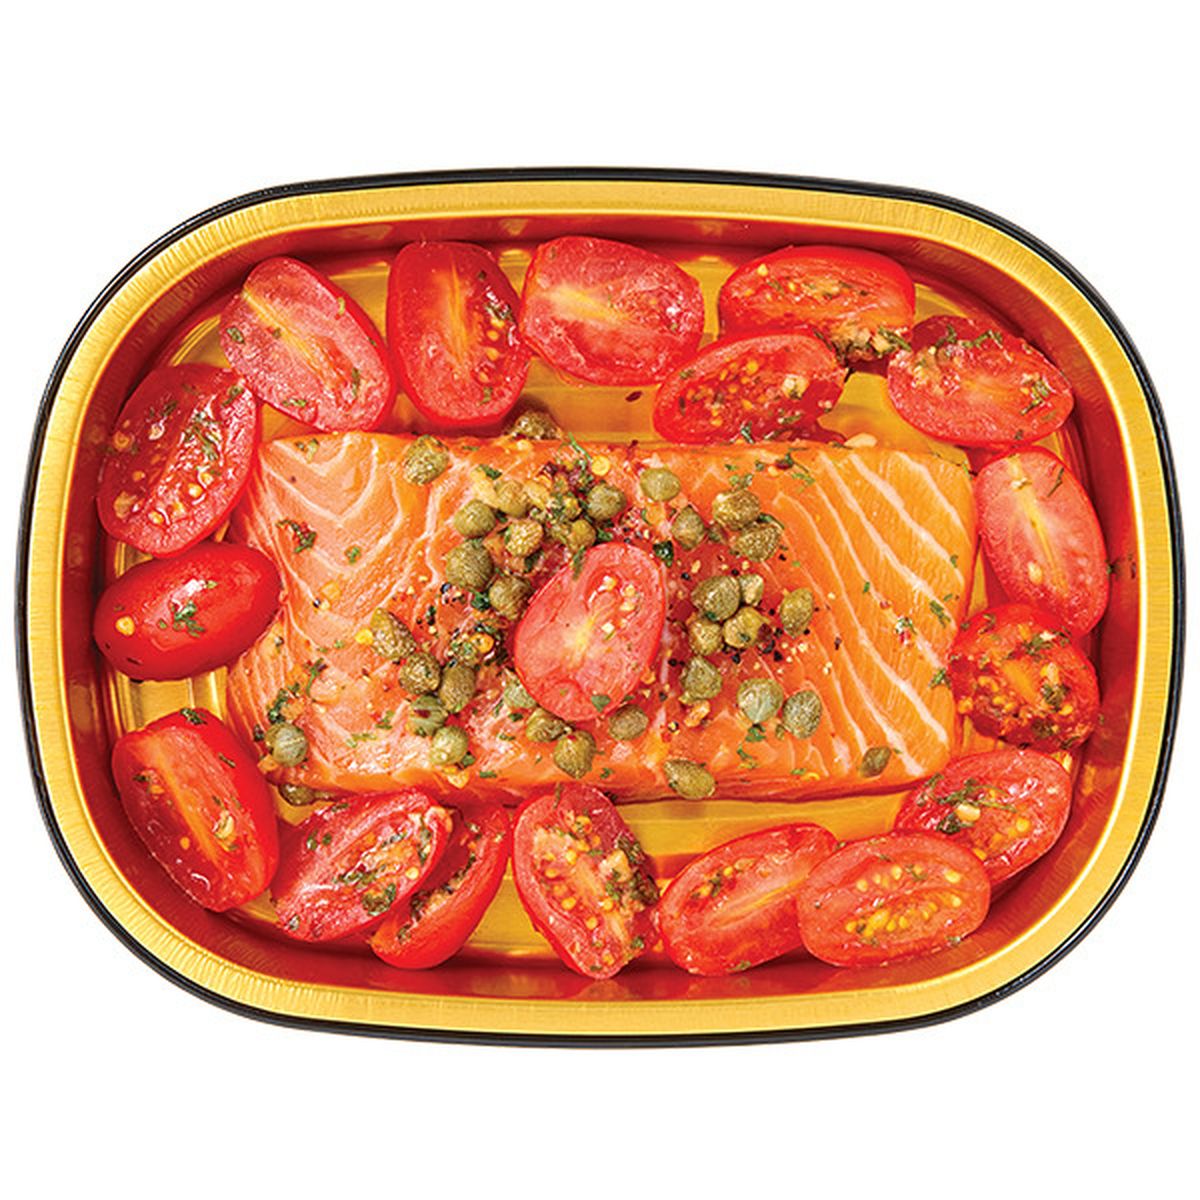 Calories in Wegmans Ready to Cook Salmon with Tomatoes & Capers